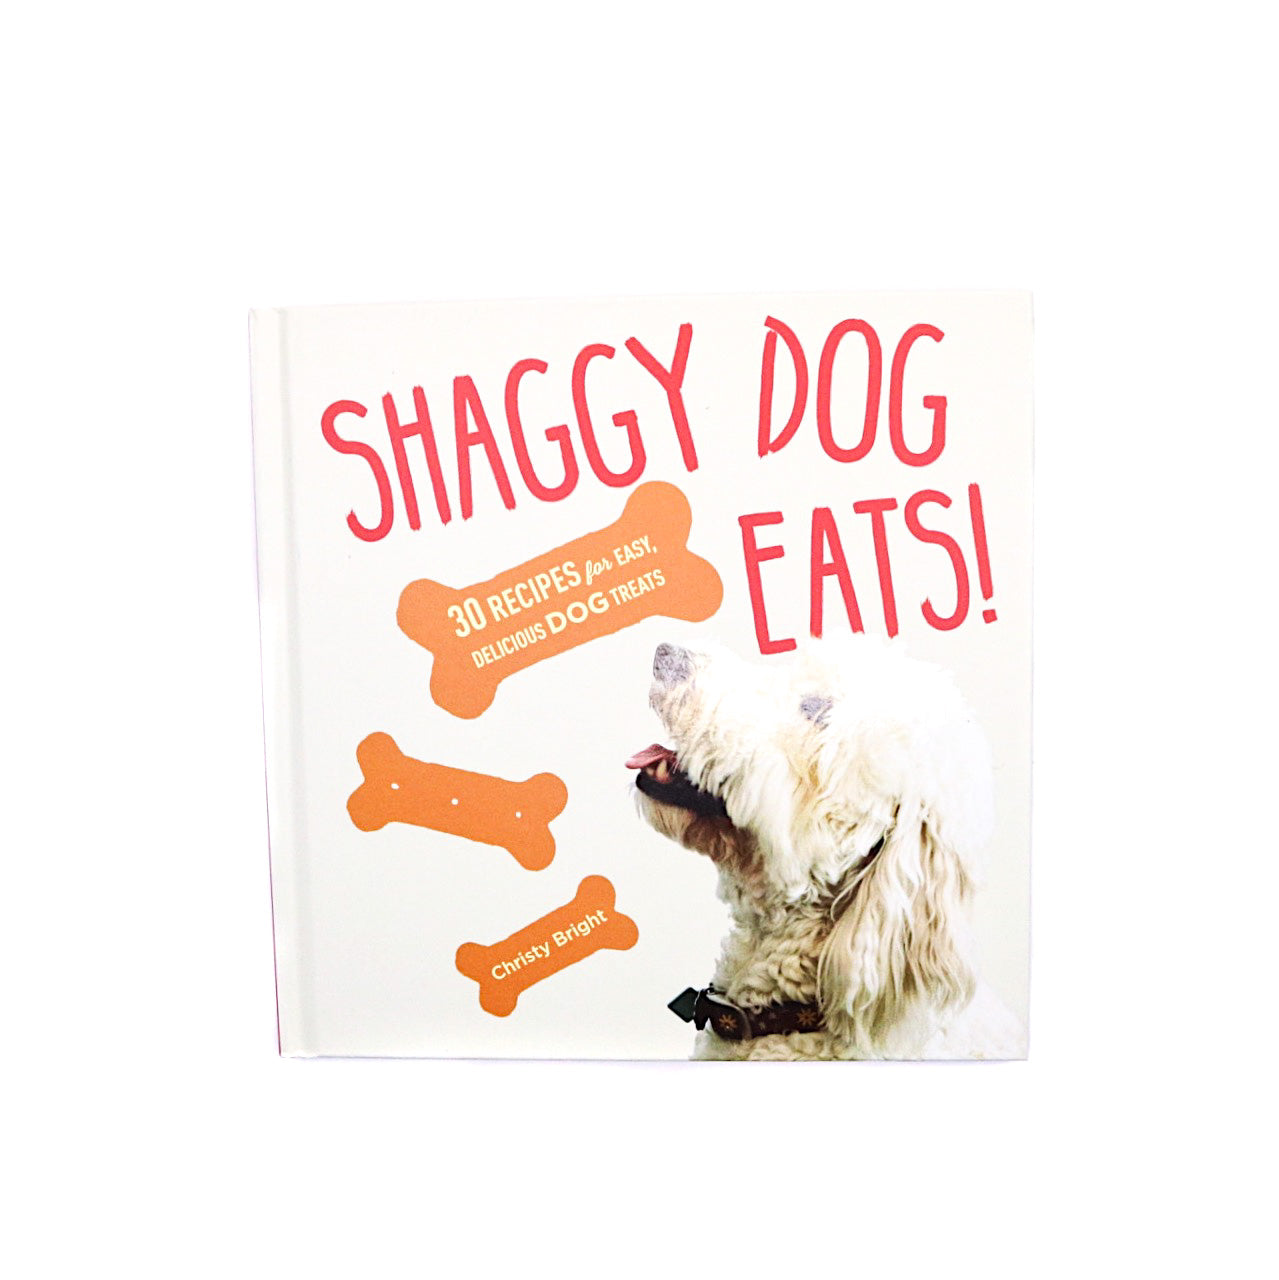 Shaggy Dog Eats by Christy Bright